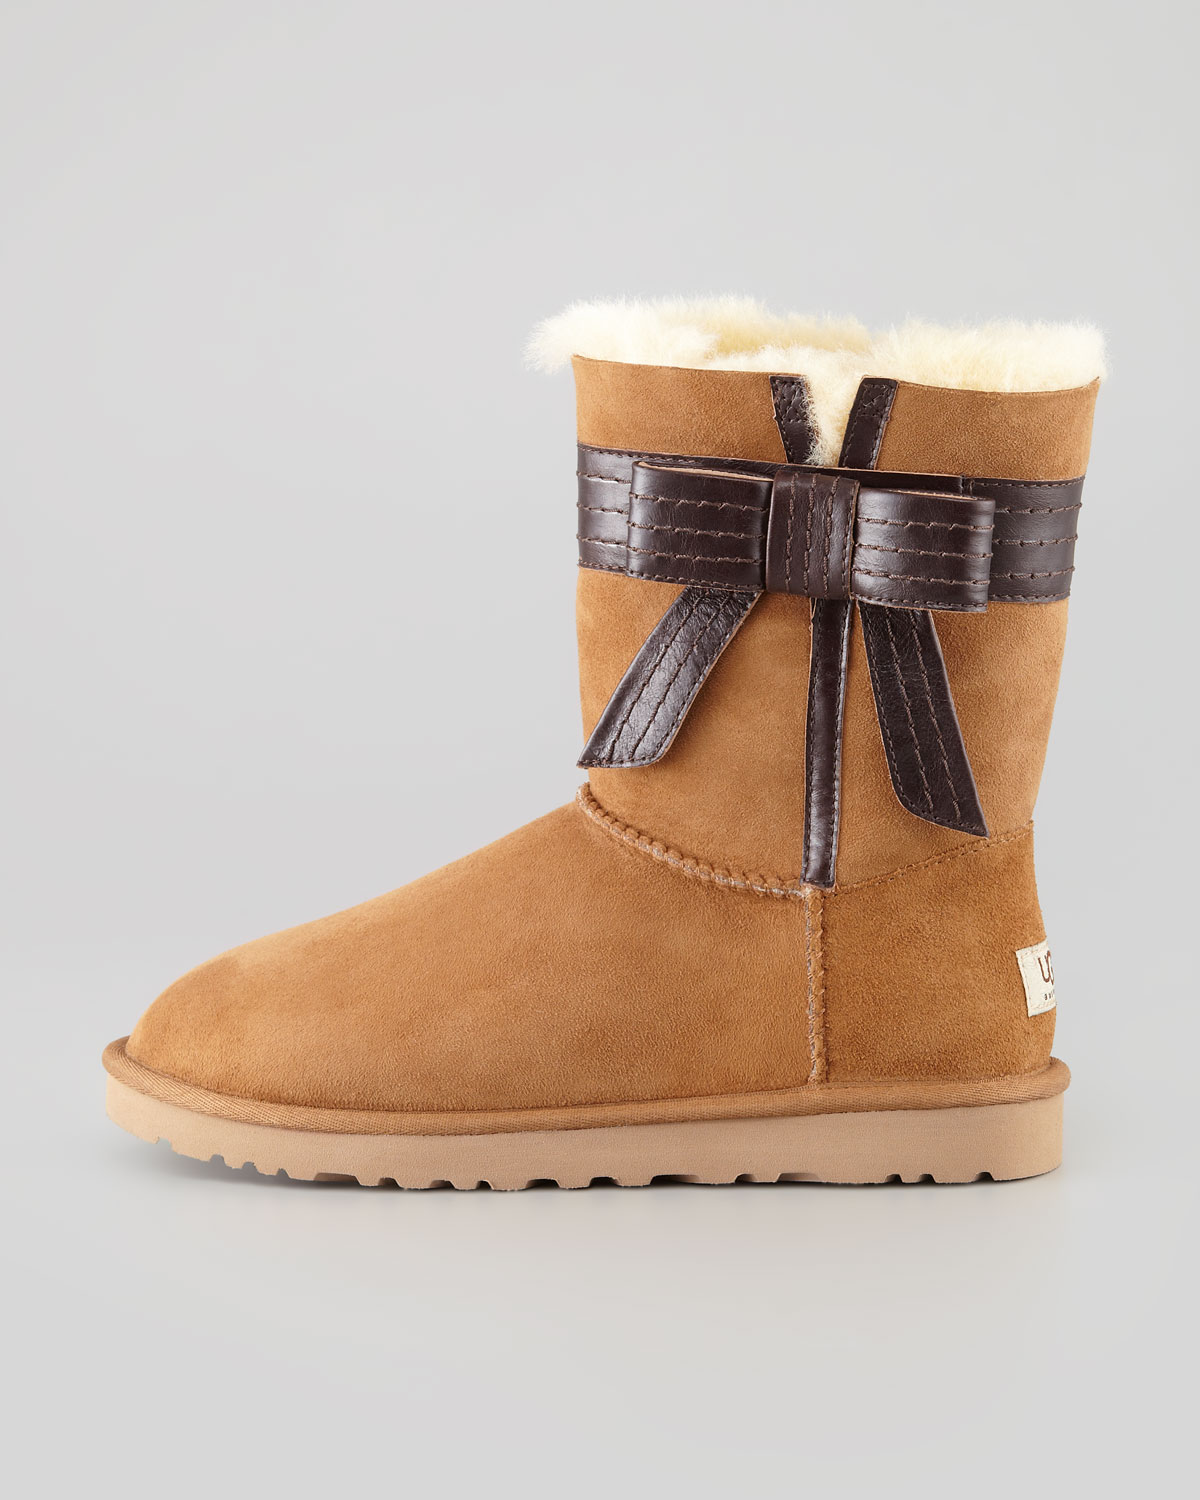 ugg boots with bows on side